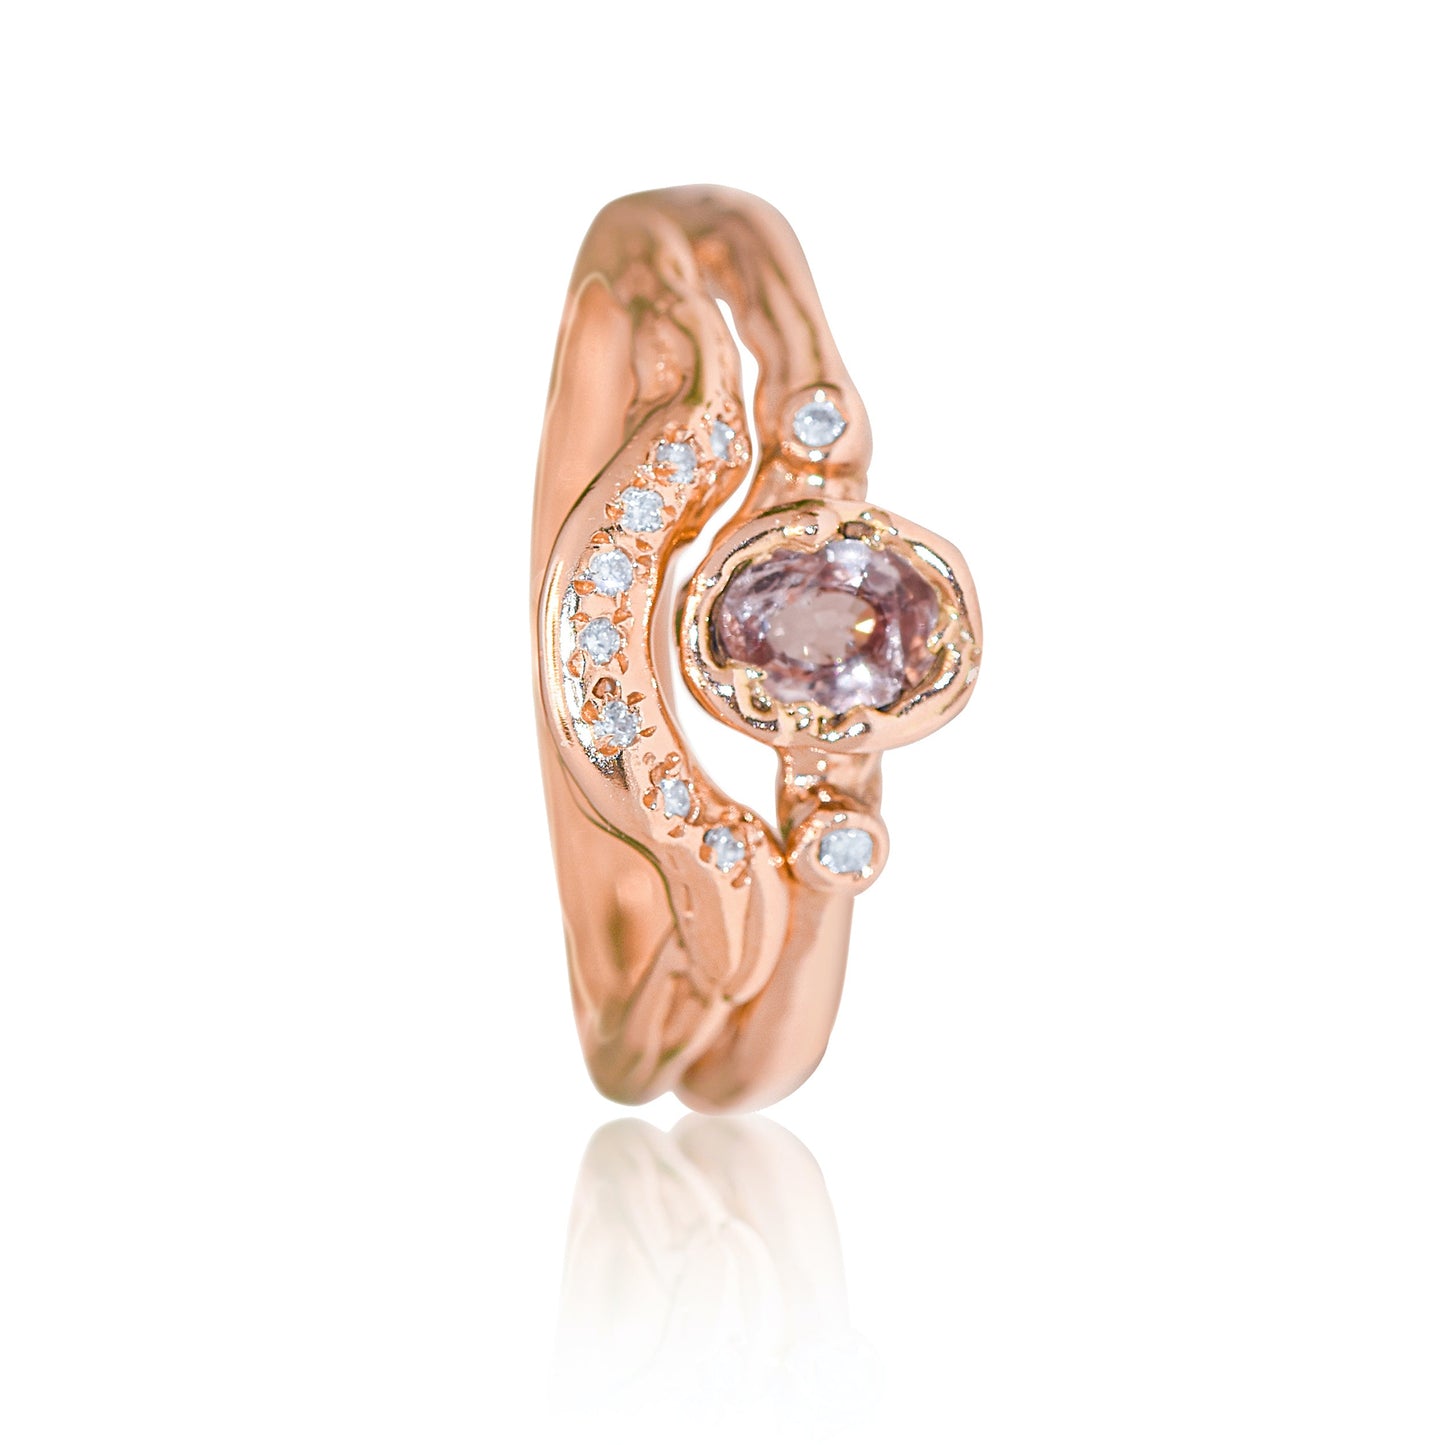 9ct Rose Gold Wedding Ring with Diamonds